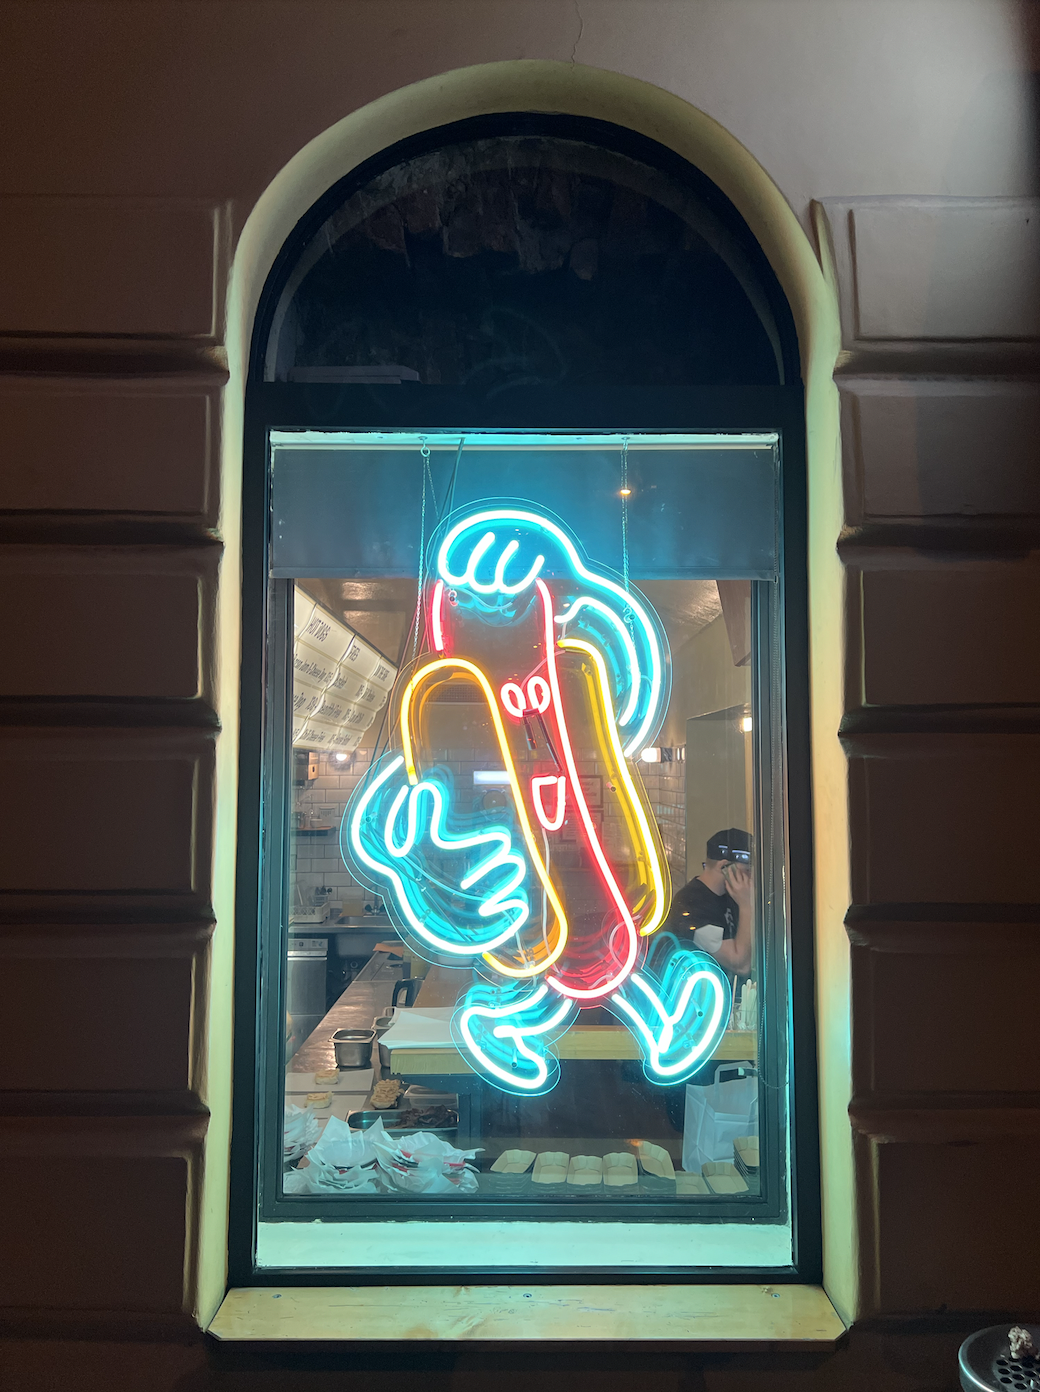 The storefront for Mr. HotDoG in Holesovice